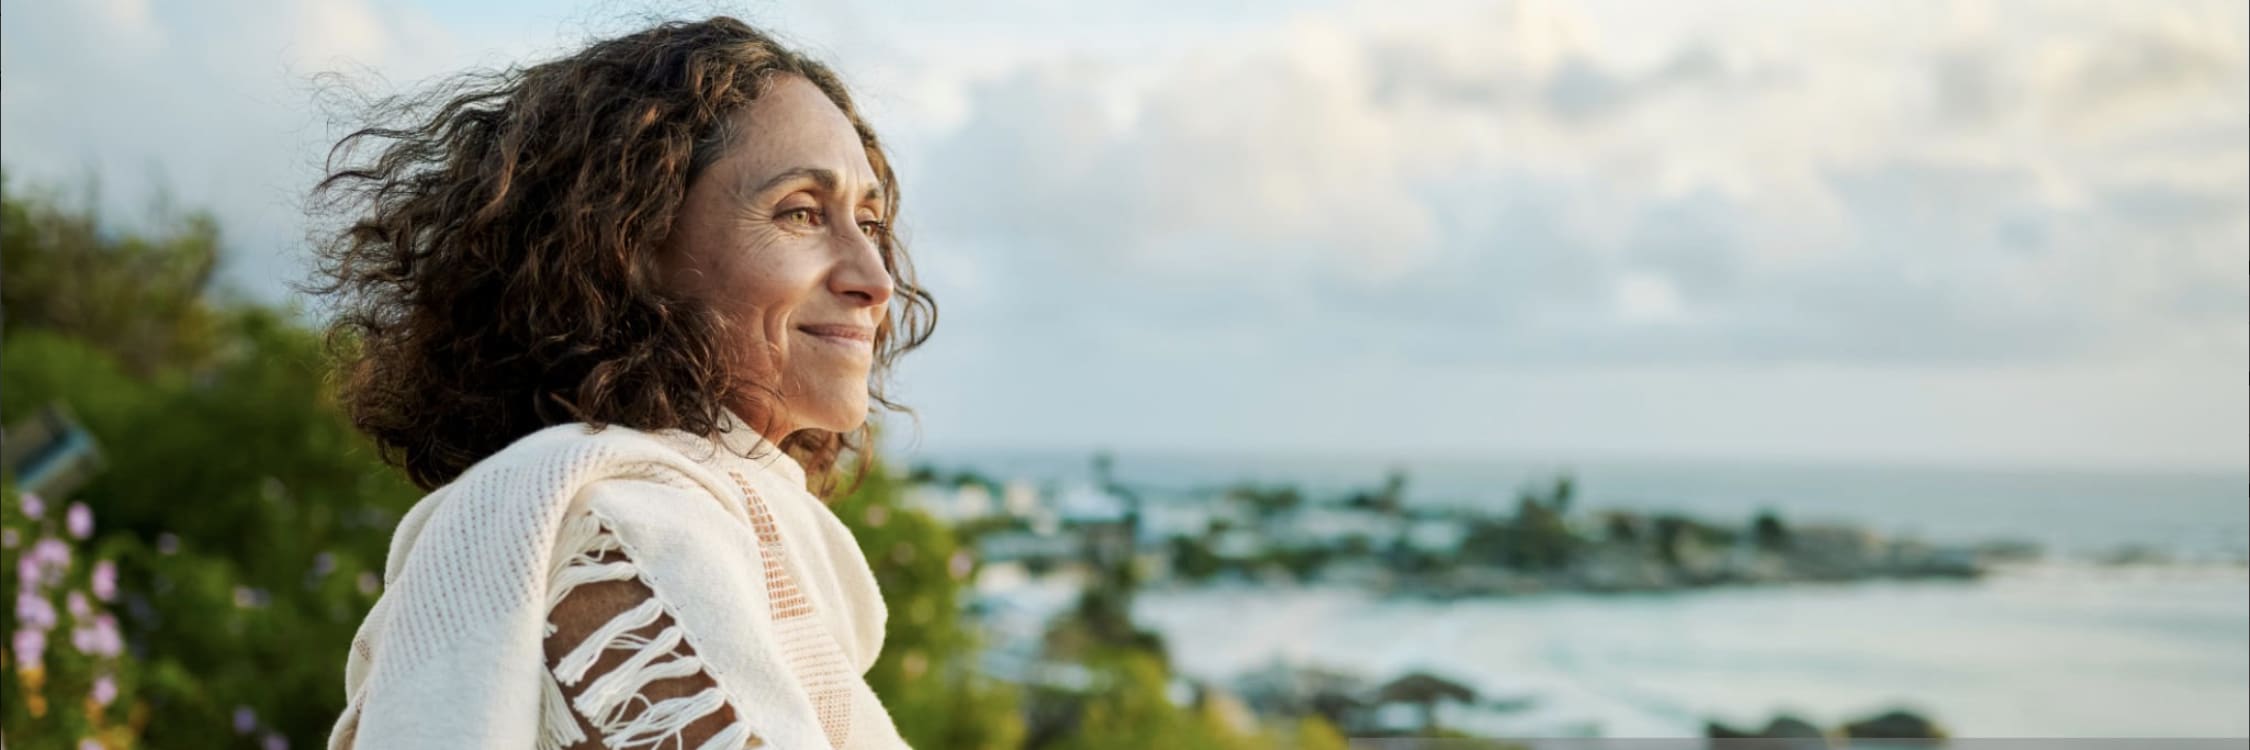 photo of a middle aged woman in a tropical setting looking out over the water and smiling